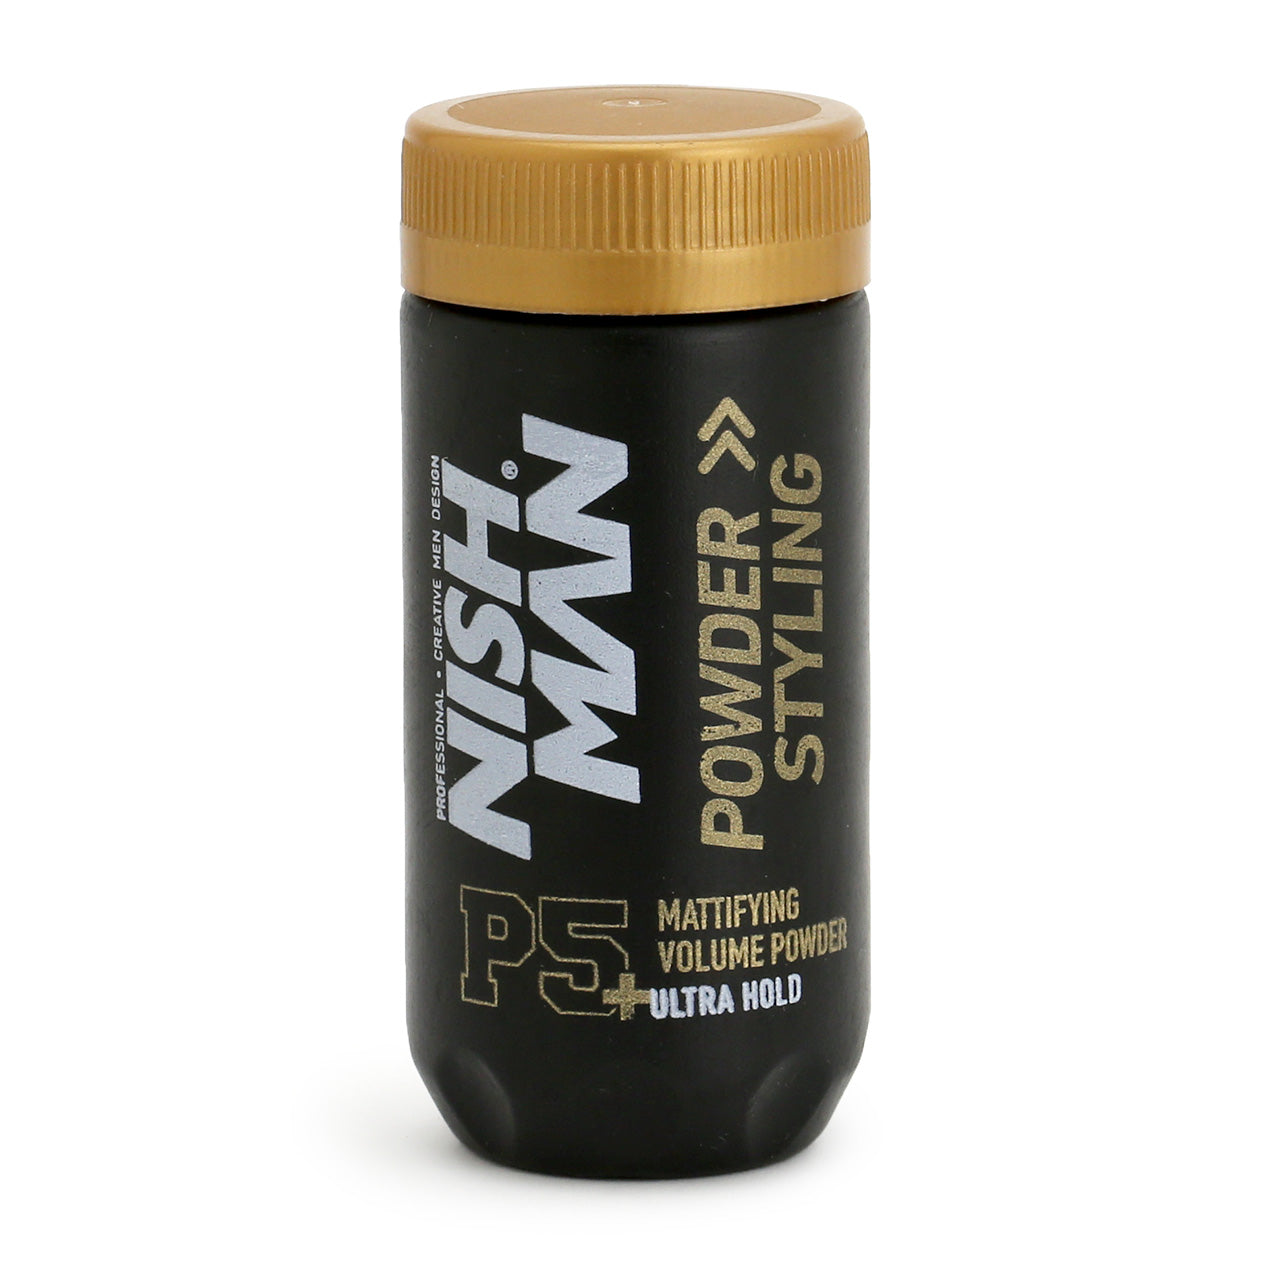 Nishman Powder Styling Ultra-Hold in it's canister and cardboard packagingthe colouring is mainly black with gold accents and lettering and white logo